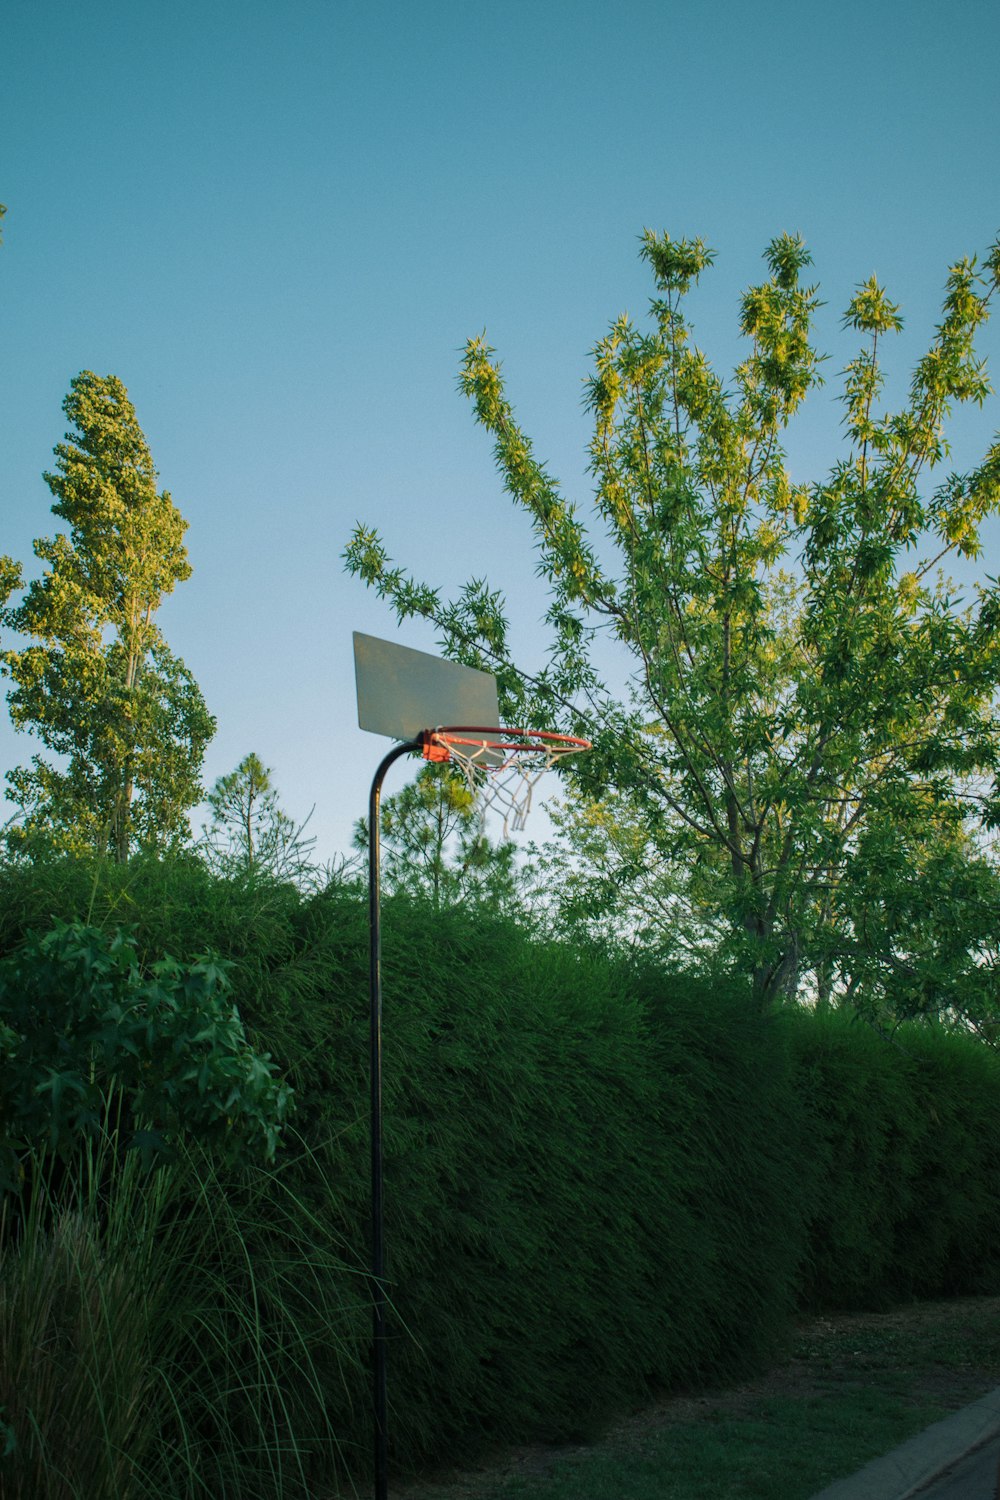 a basketball hoop in the middle of a grassy field